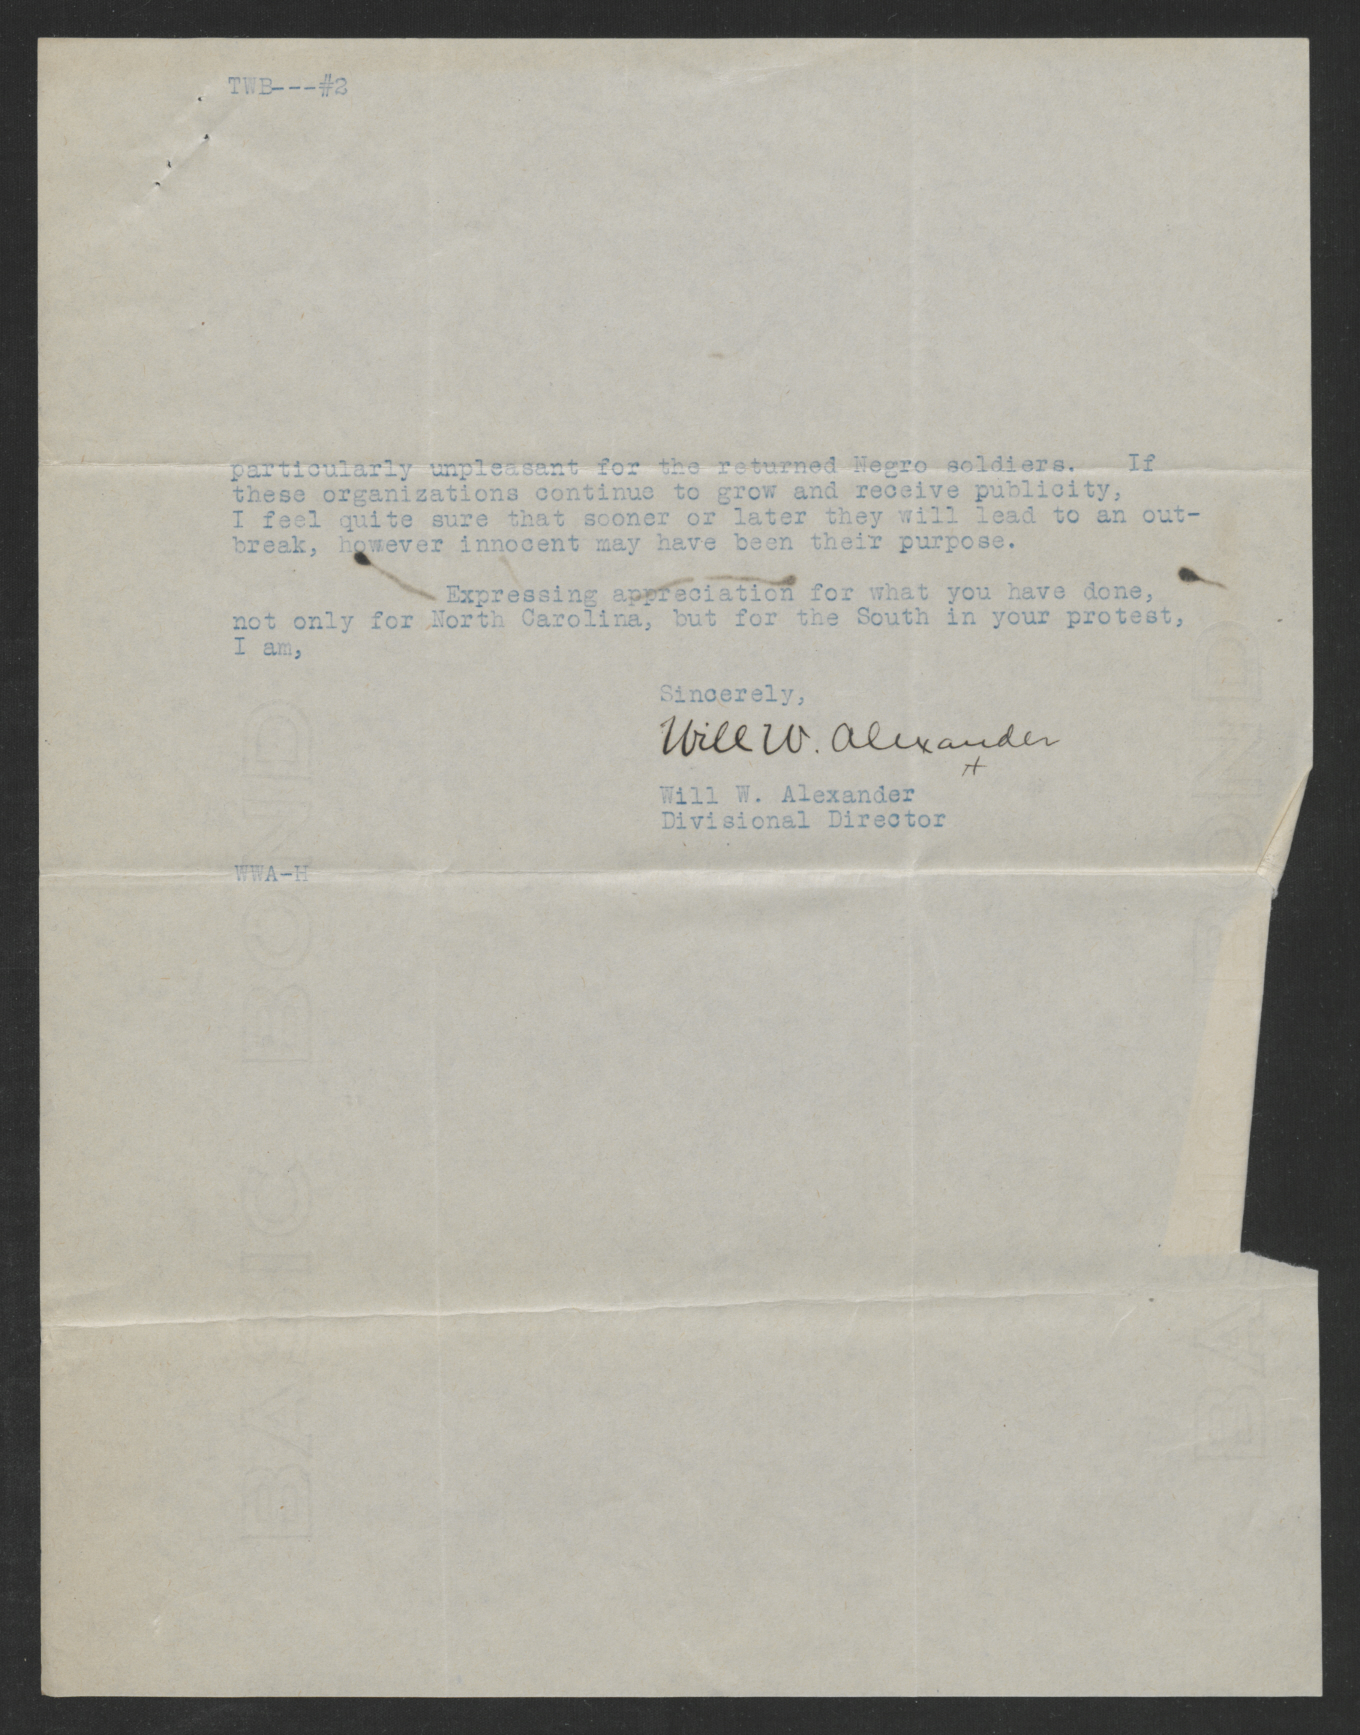 Letter from Will W. Alexander to Thomas W. Bickett, July 3, 1919, Page 2